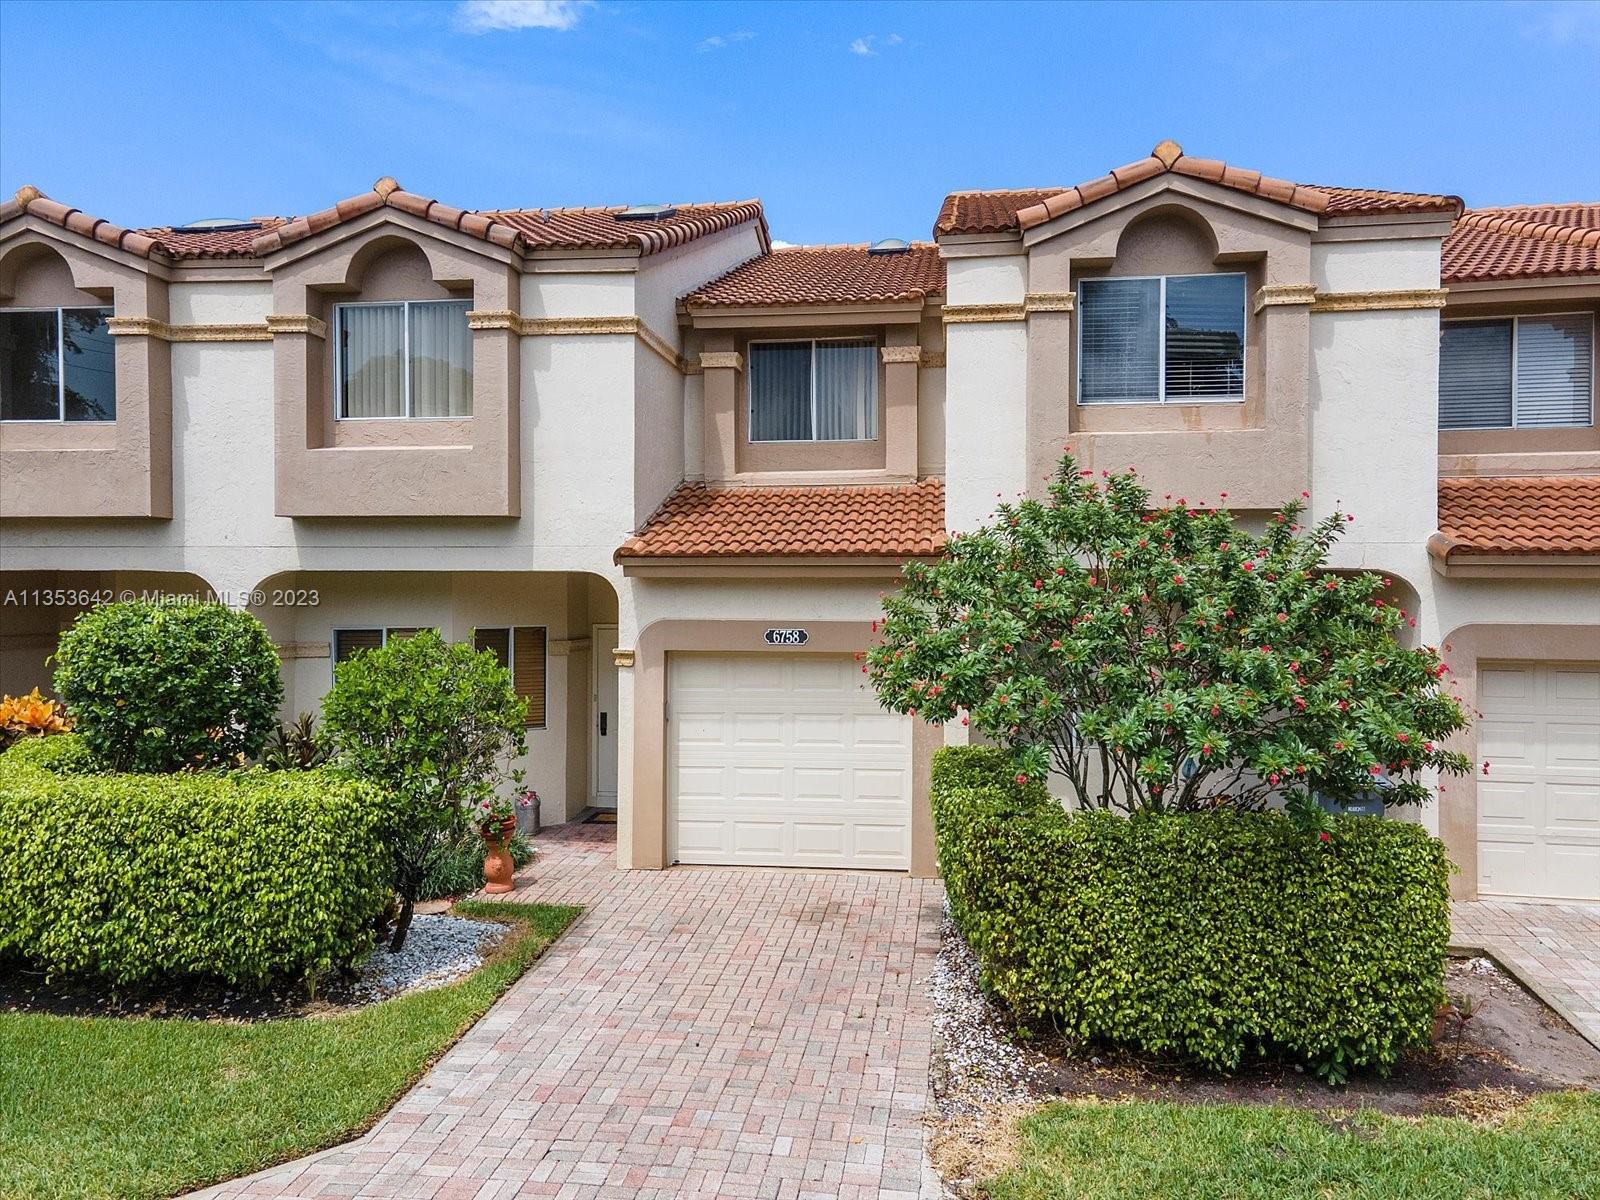 This gorgeous remodeled townhome is located in the Boca Pointe Country Club.  Boca Pointe is one of 